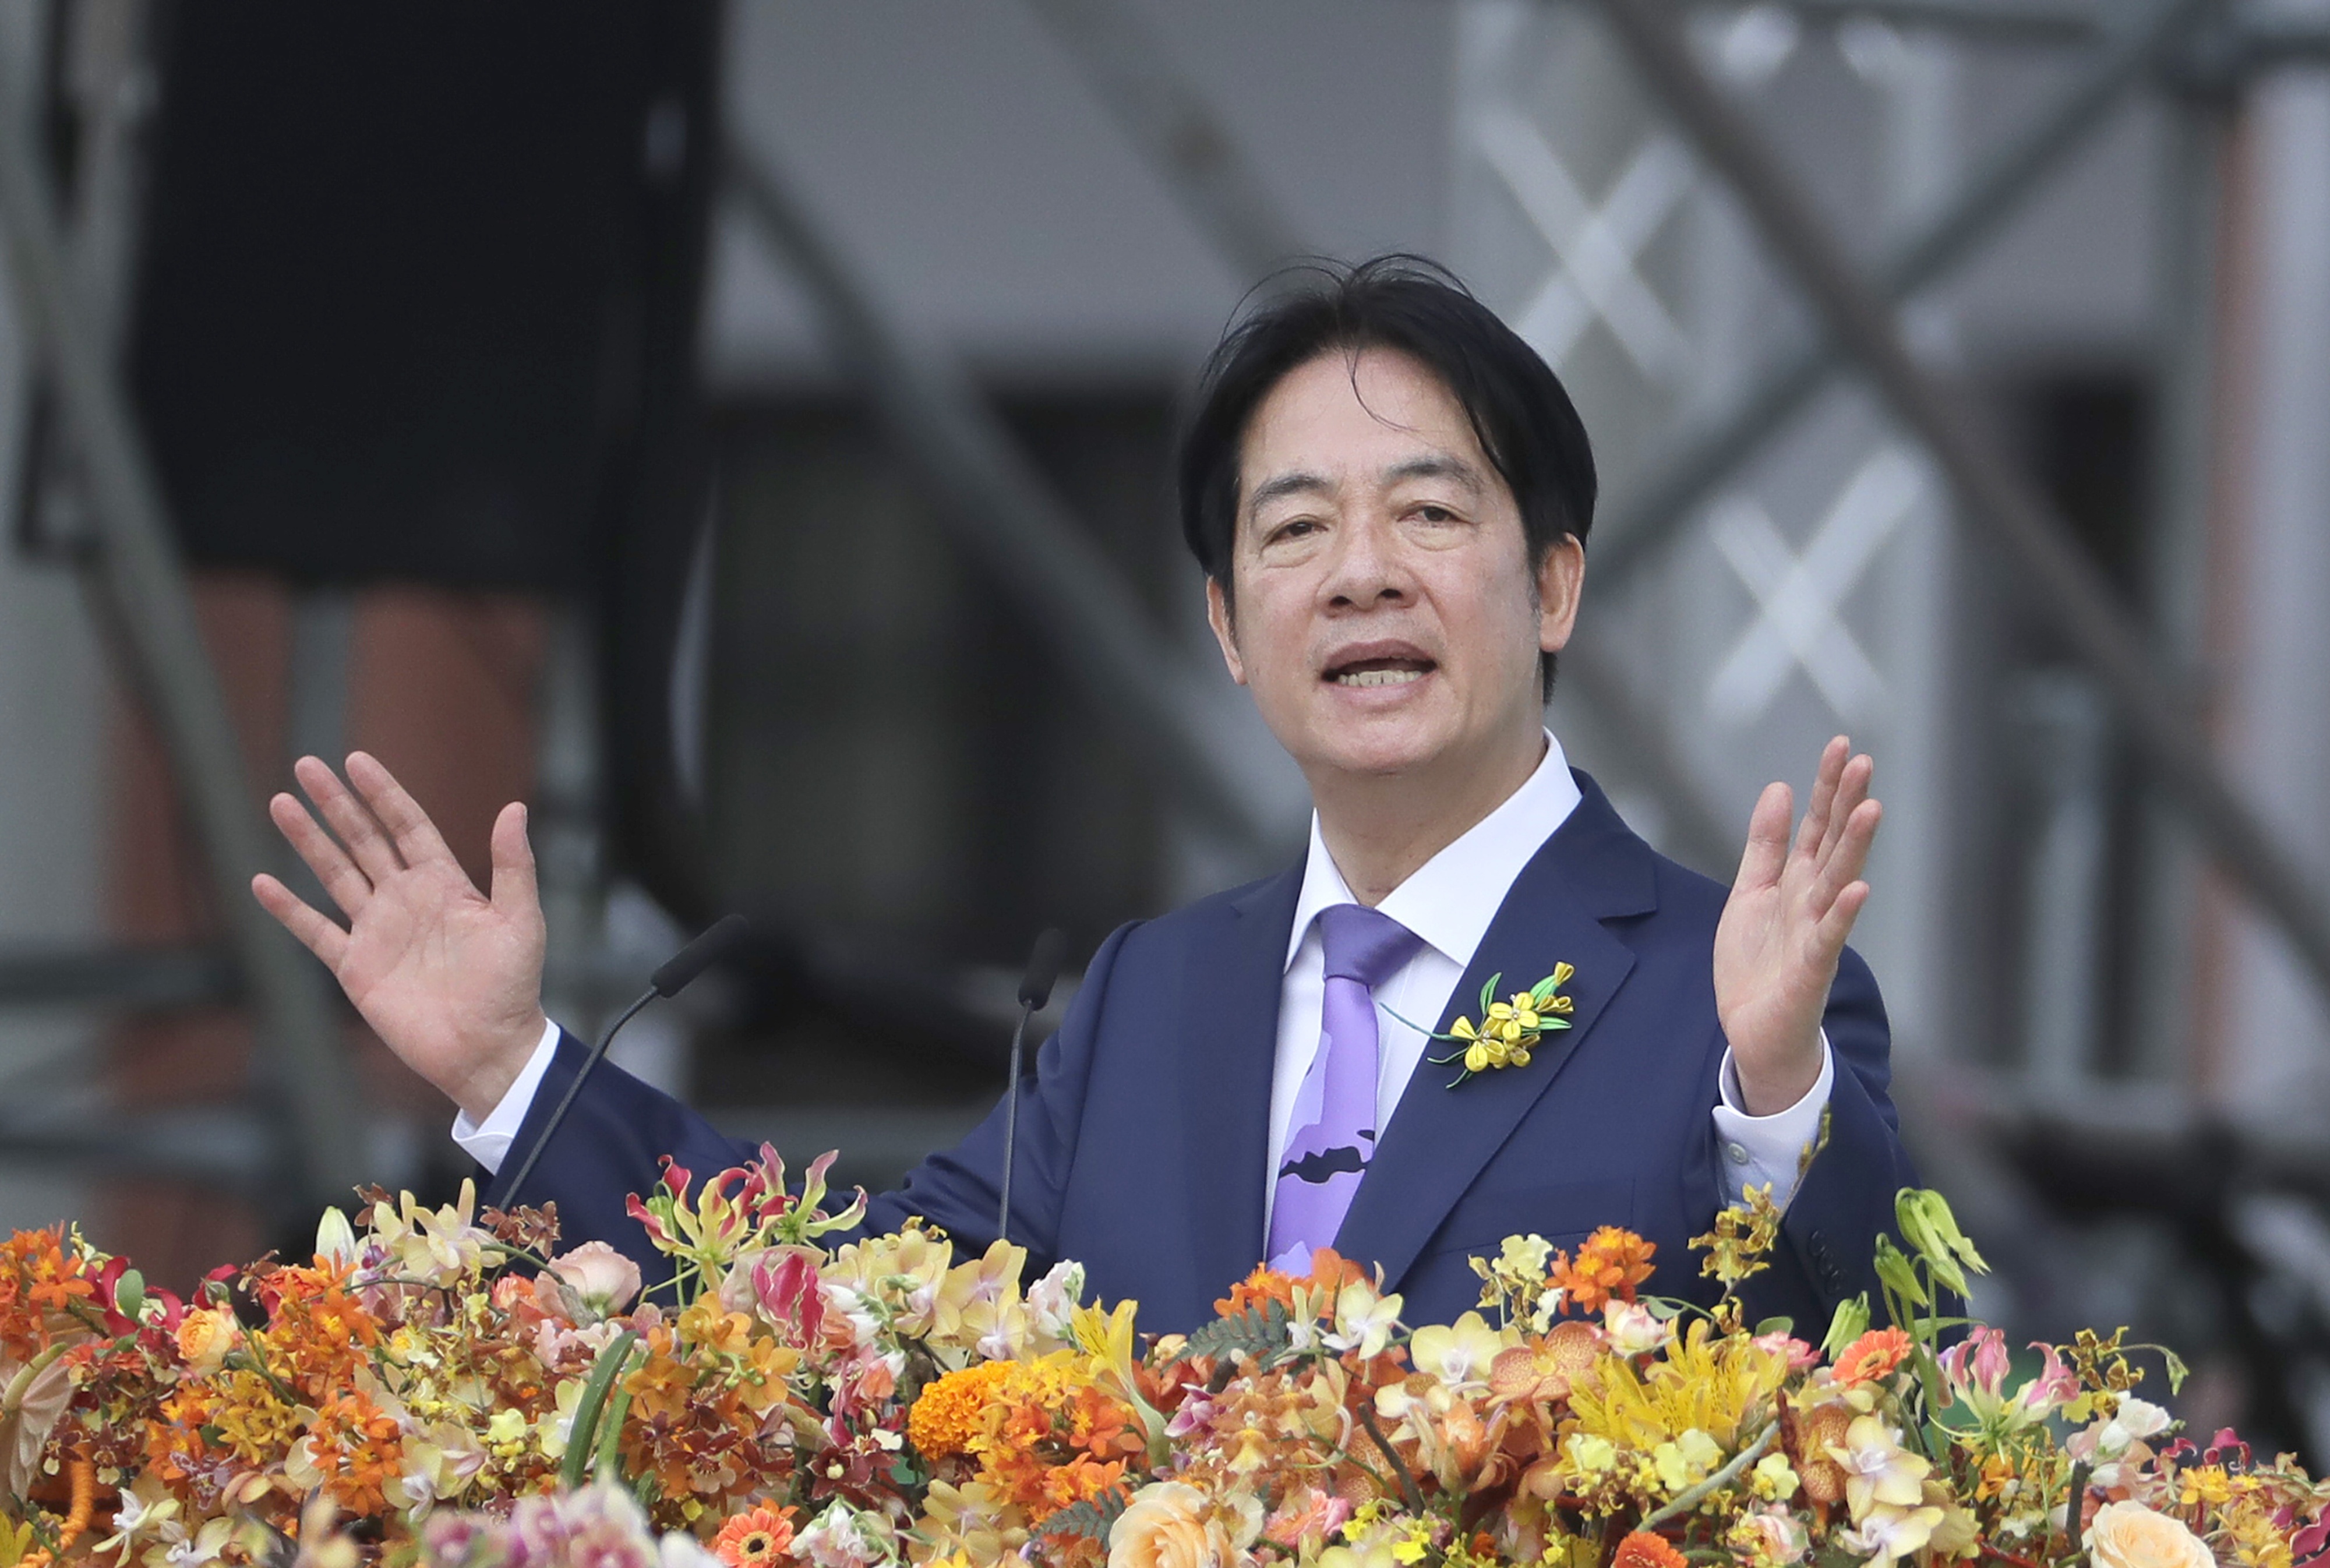 Taiwan's President Lai Ching-te delivers an acceptance speech during his inauguration ceremony